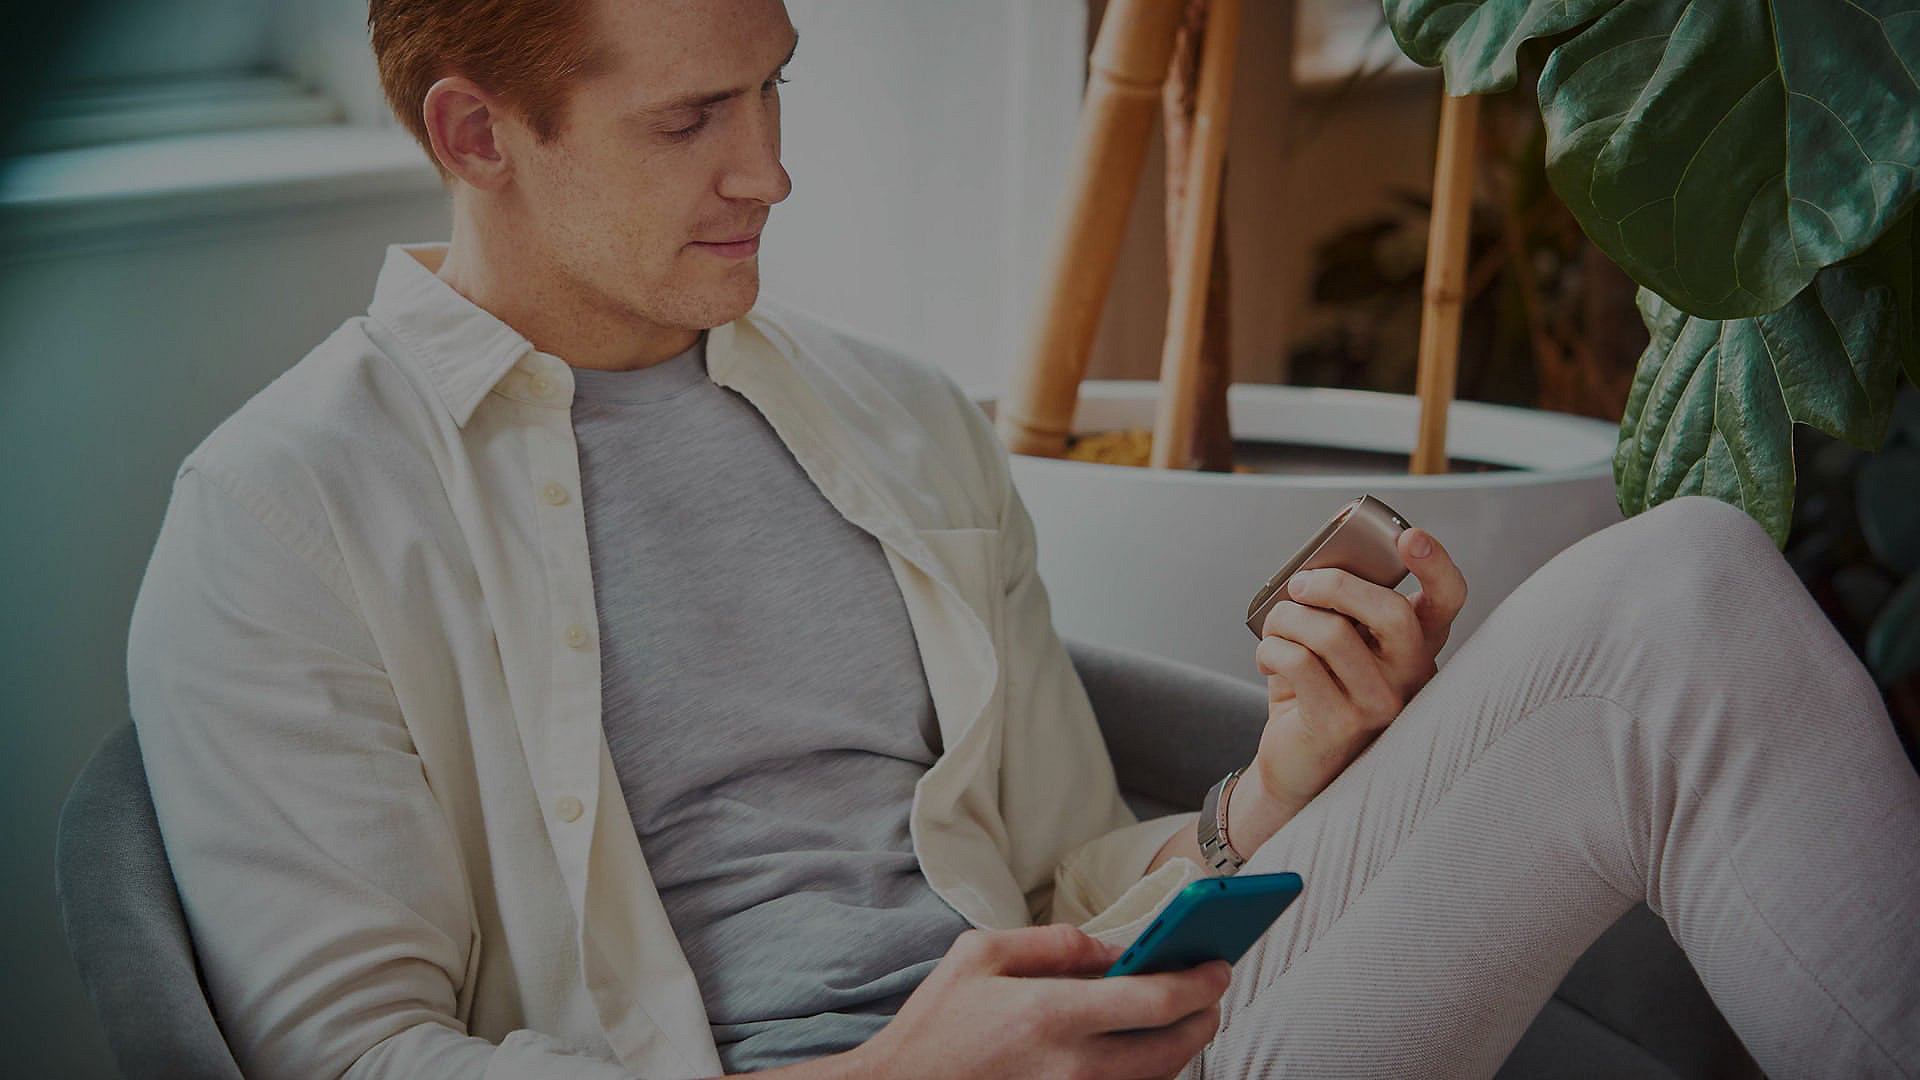 A man sitting in an armchair with his cellphone in his right hand looks to his left hand admiring his IQOS 3 DUO